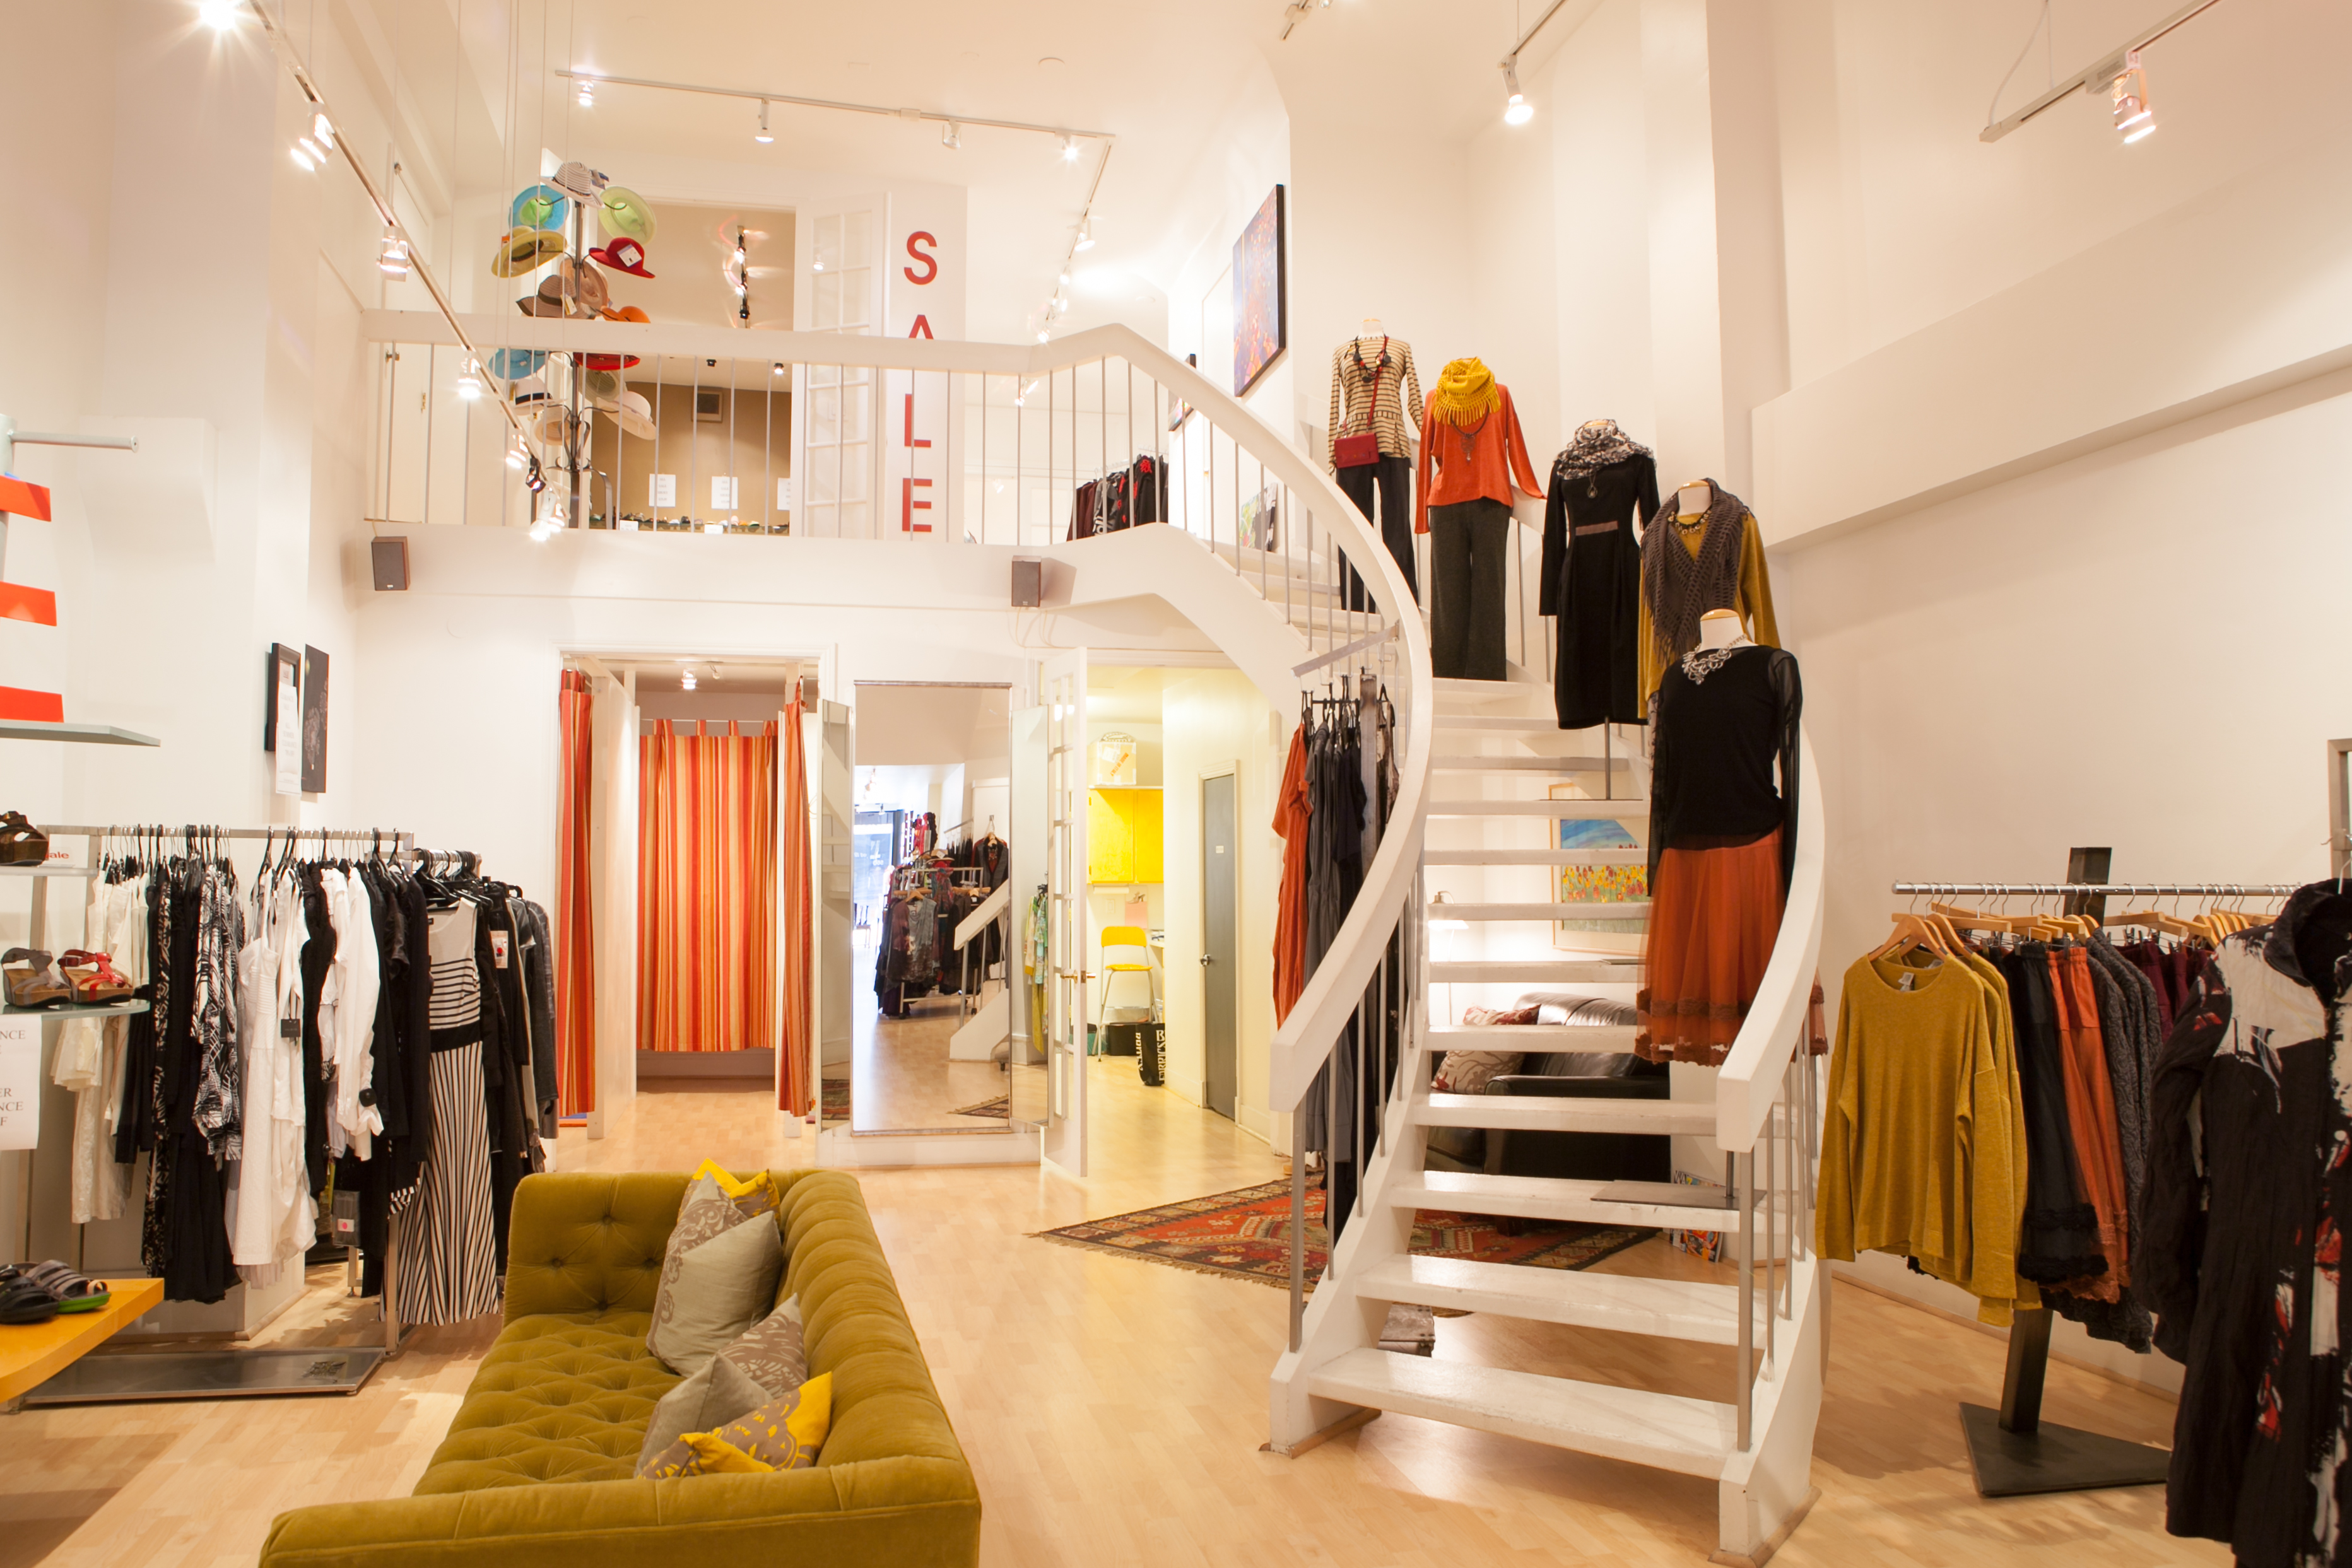 Setting Up A Pop-Up Store: 5 Tips To Make It Successful - Retail